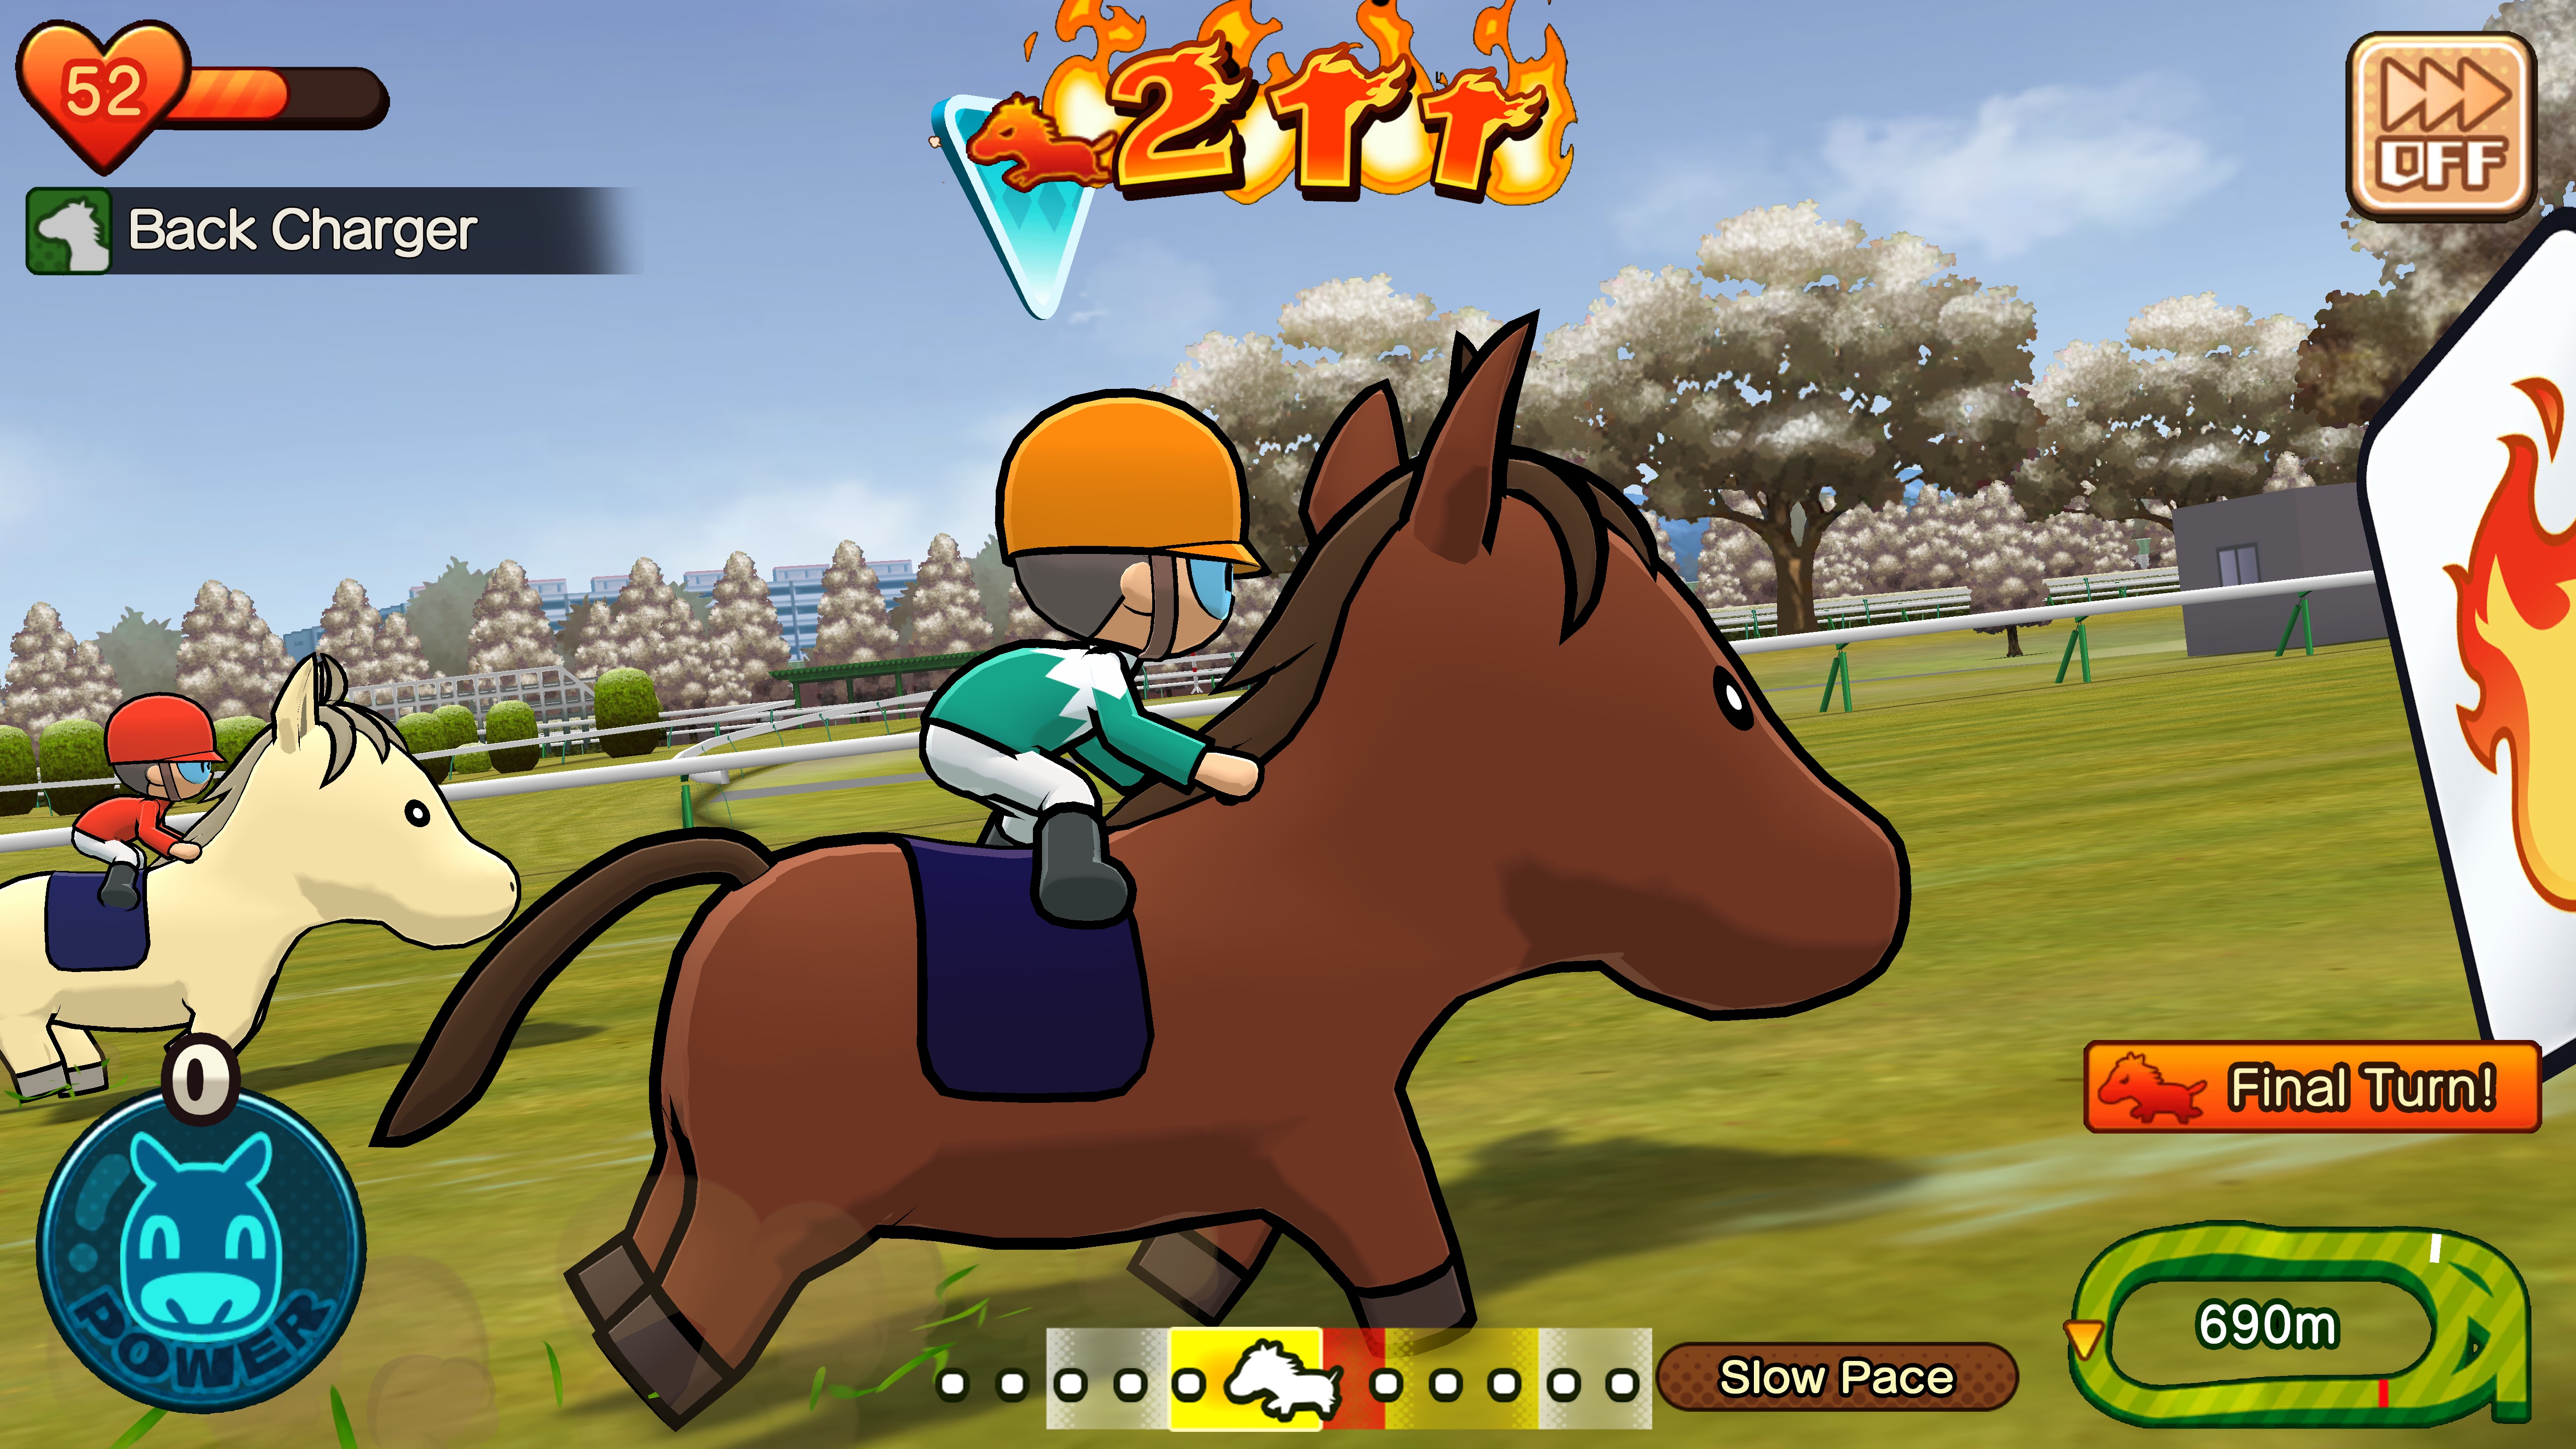 A close-up profile view of a cartoonish horse and its jockey riding on a grassy race track from the game Pocket Card Jockey: Ride On!